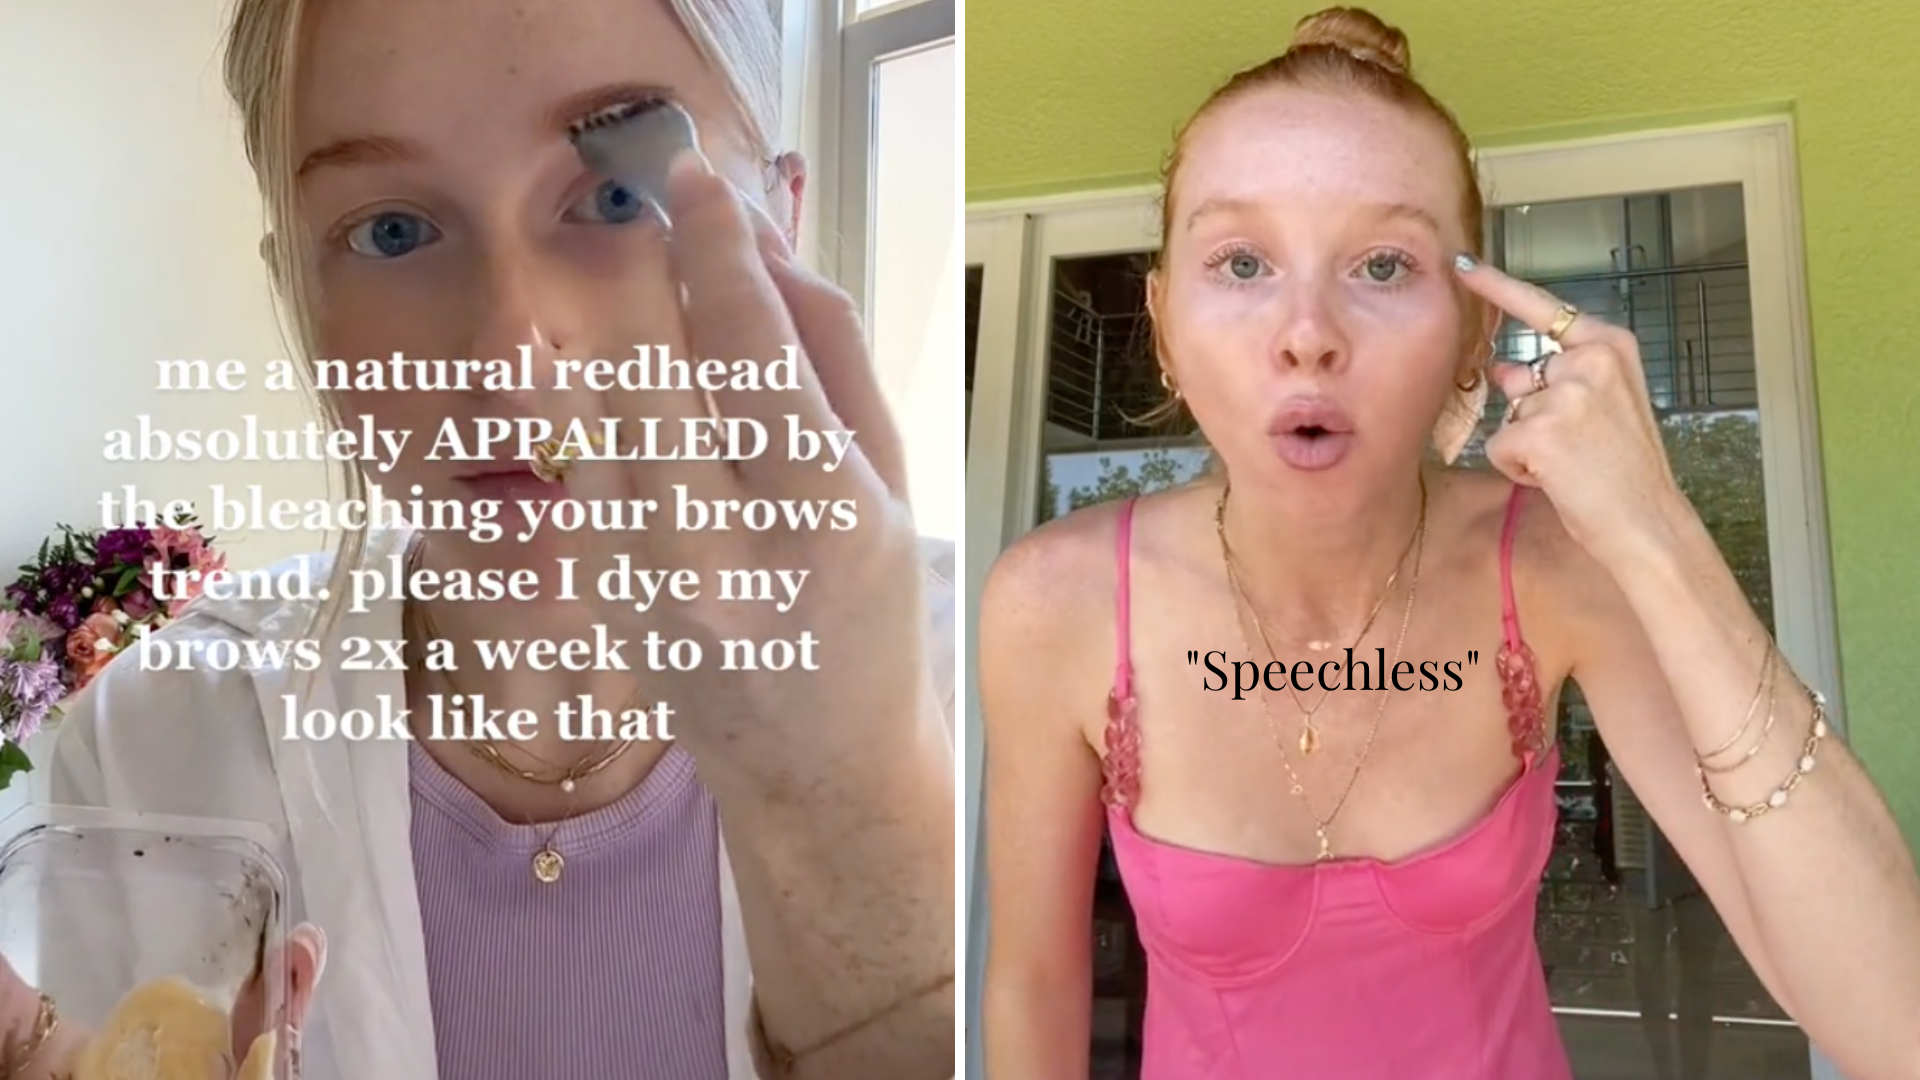 The Bleached Eyebrows Trend Is Very Popular: This Is What Redheads Have To Say About It